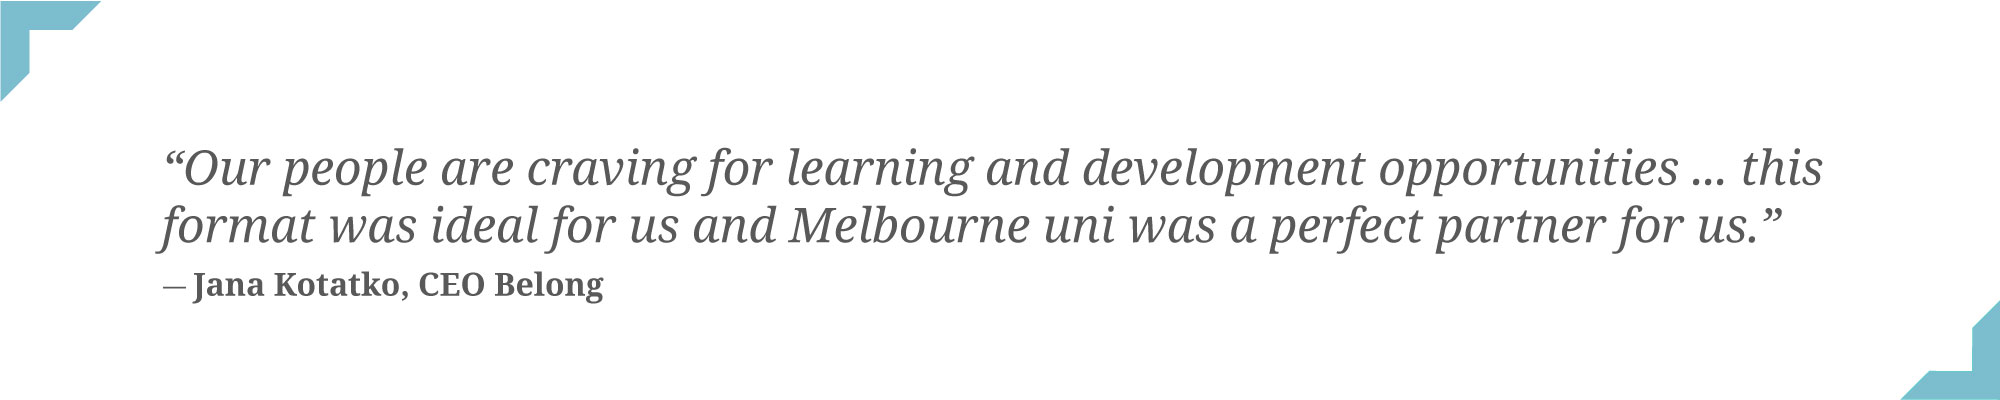 Our people are craving for learning and development opportunities ... this format was ideal for us and Melbourne uni was a perfect partner for us - quote by Jana Kotatko CEO Belong